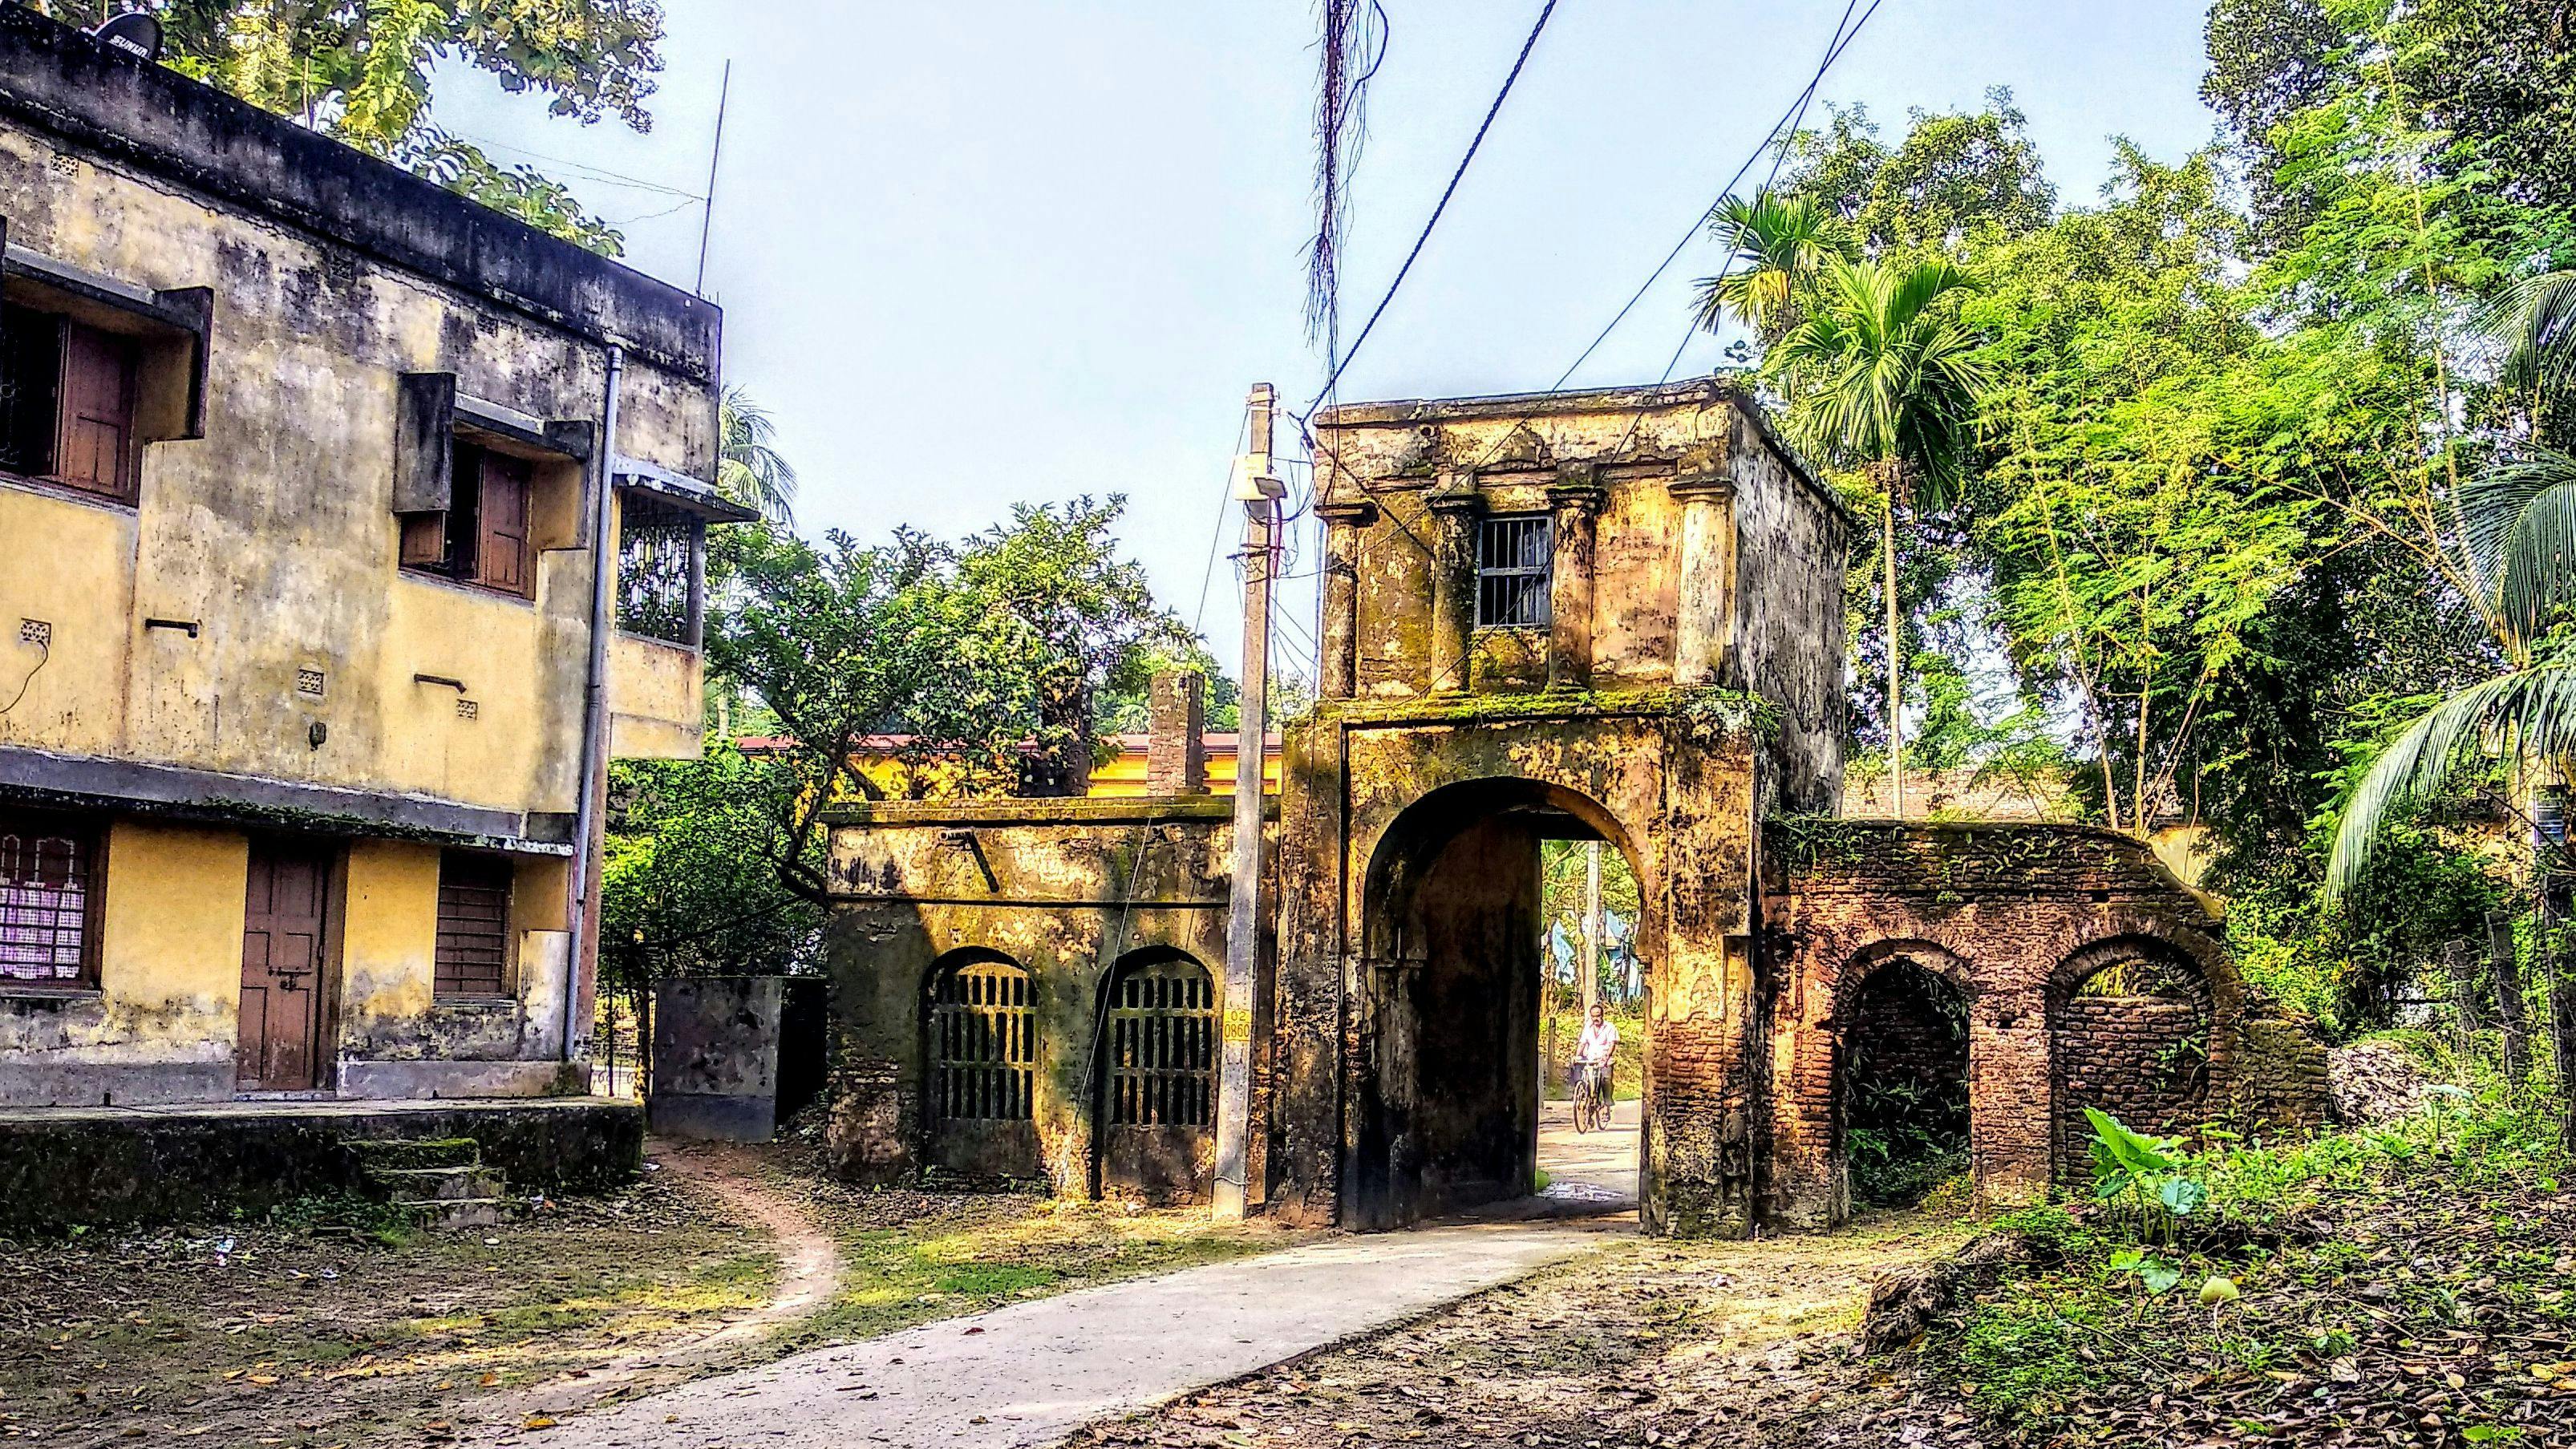 The arched gateway of the Mitra Mustafi family in Ula-Birnagar is a mute witness to the glory days